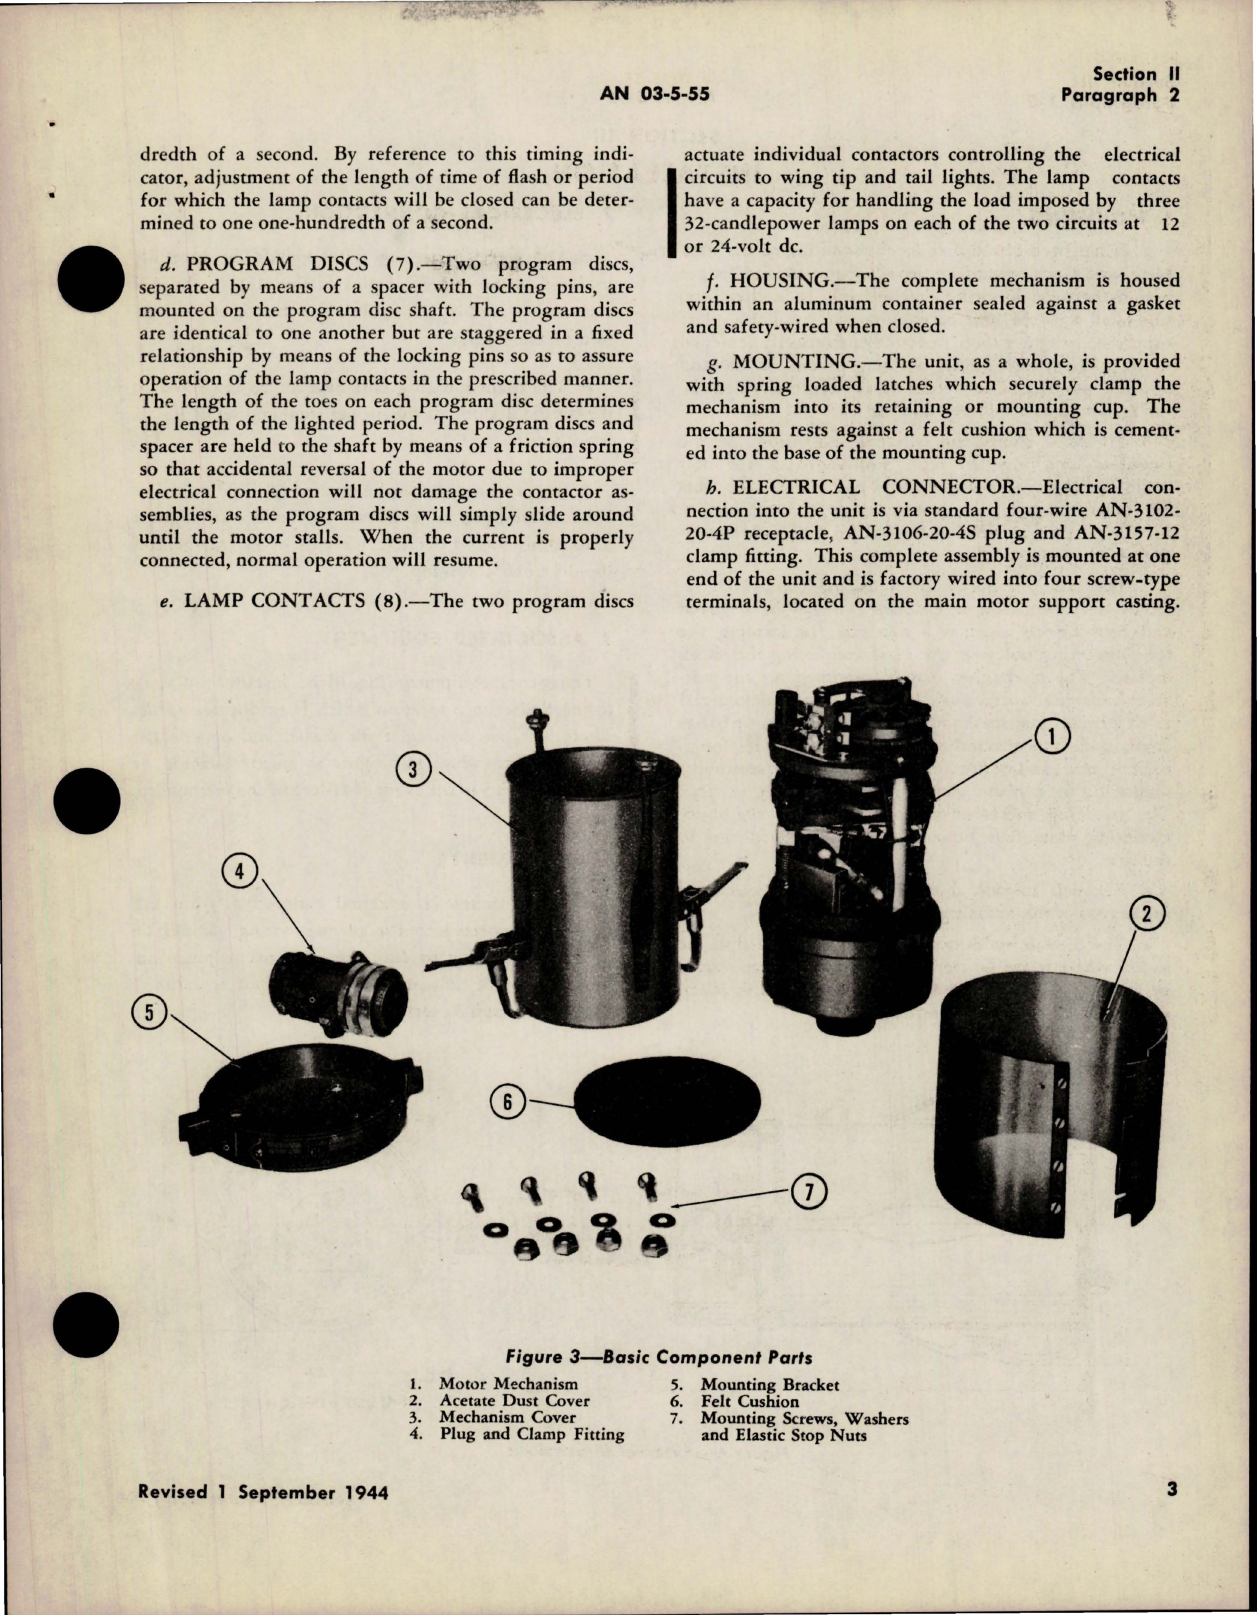 Sample page 7 from AirCorps Library document: Handbook of Instructions with Parts Catalog for Aircraft Flasher Mechanism - Types FA-121 and FA-122